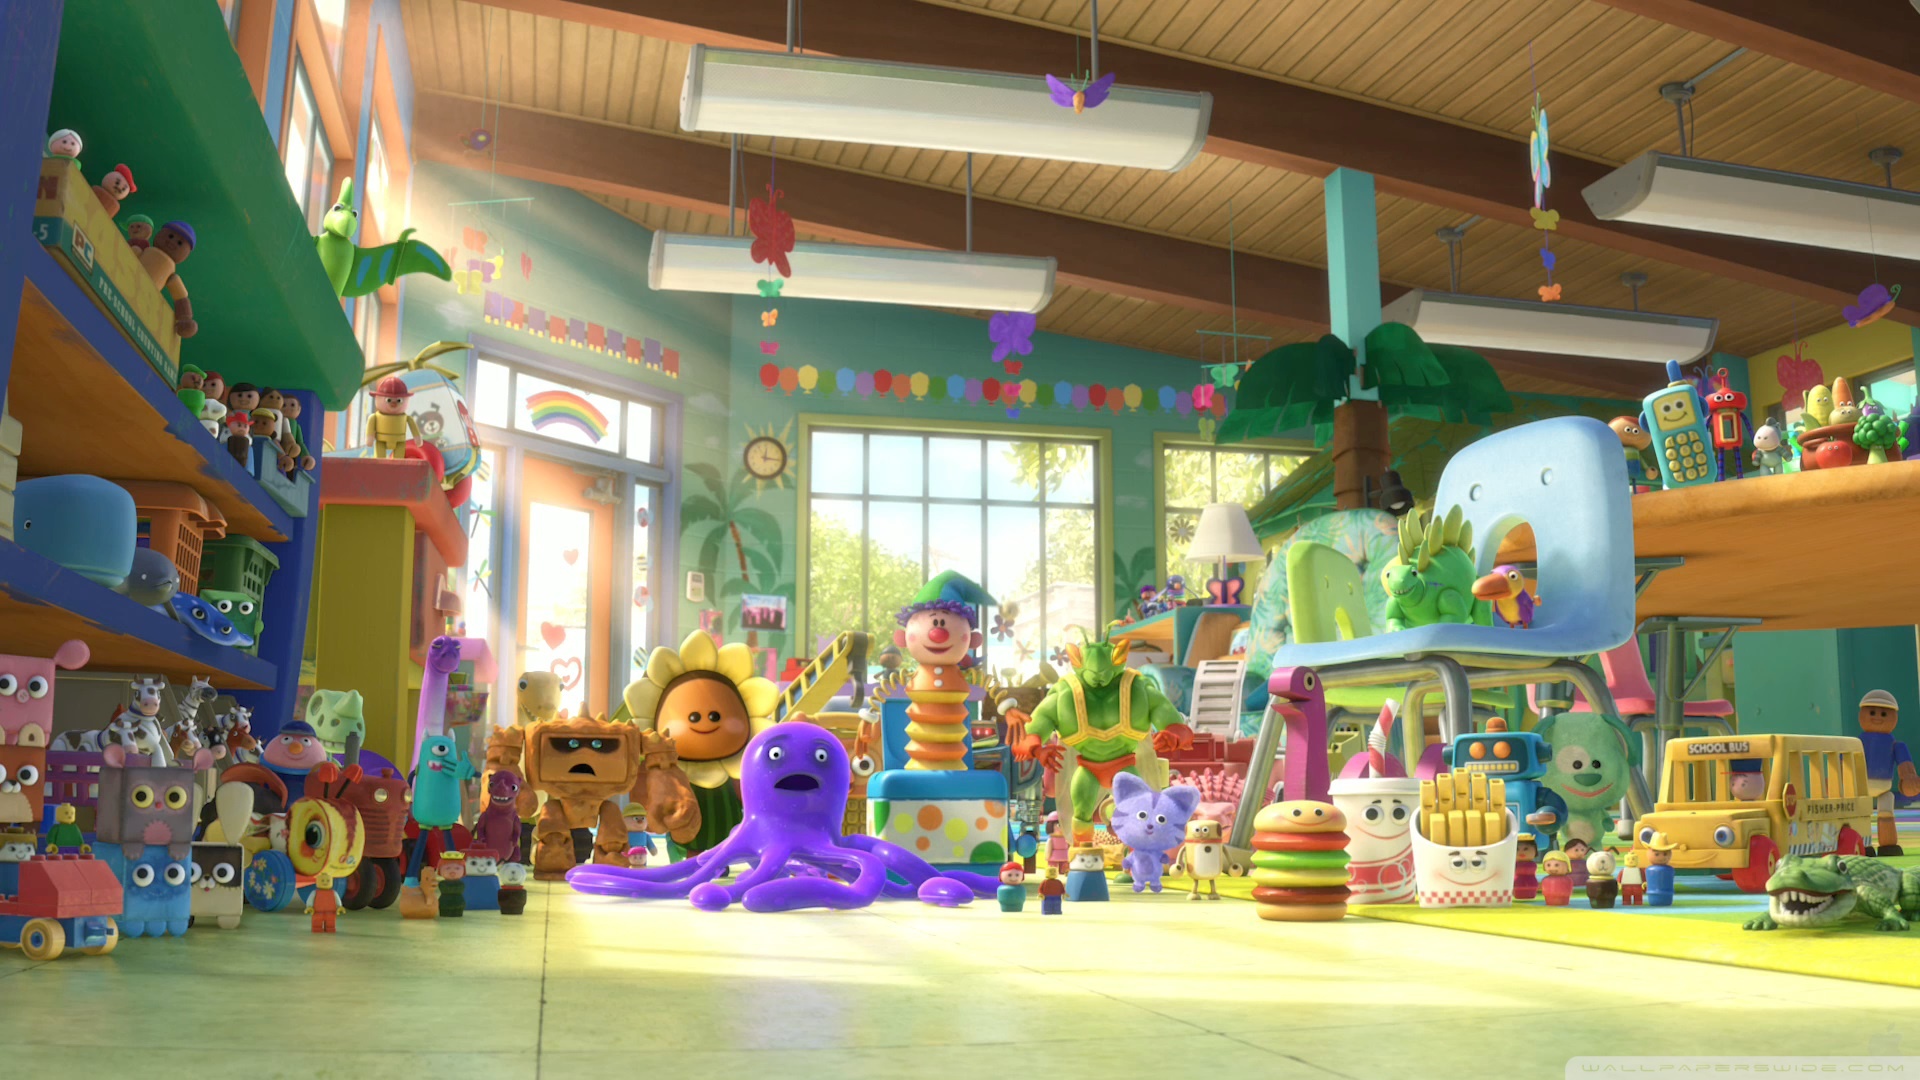 Toy Story 3 New Toys Wallpaper Full HD [1920x1080] - Free ...